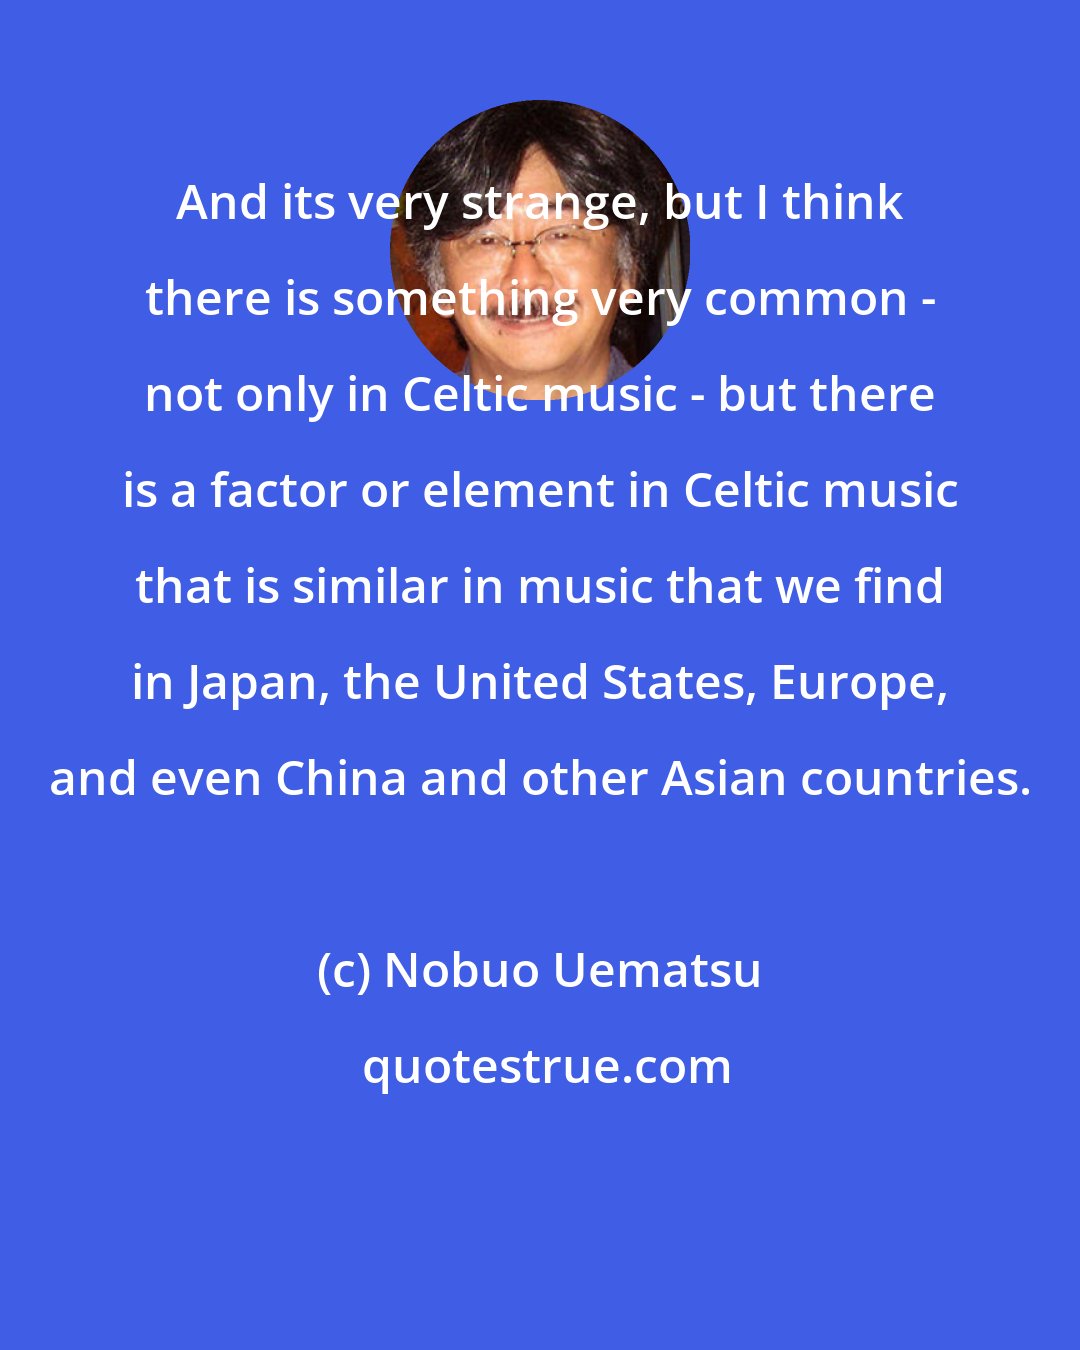 Nobuo Uematsu: And its very strange, but I think there is something very common - not only in Celtic music - but there is a factor or element in Celtic music that is similar in music that we find in Japan, the United States, Europe, and even China and other Asian countries.